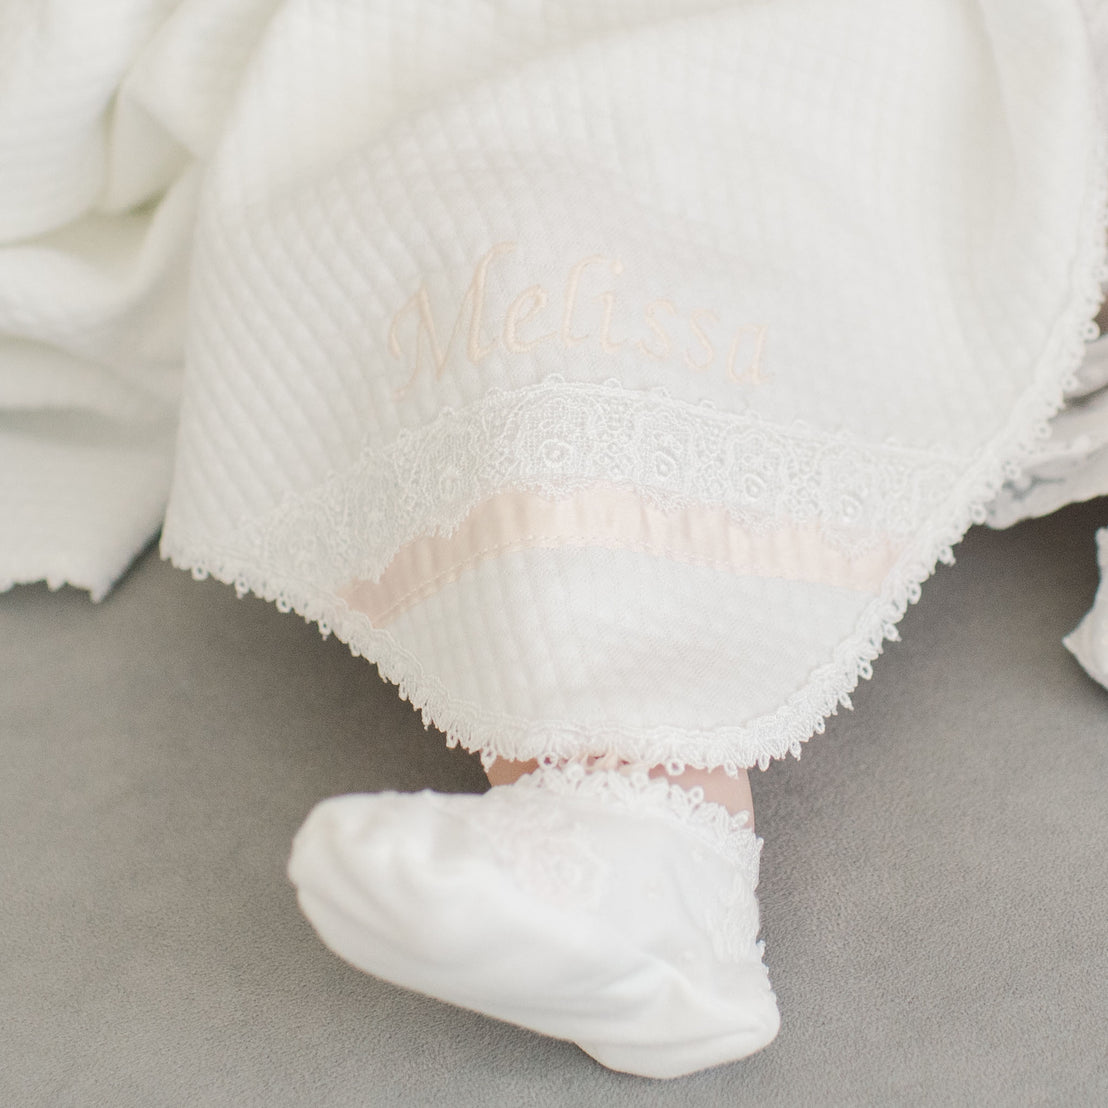 A baby's foot peeks out from under a soft white blanket embroidered with the name "Melissa," surrounded by lacy detailing and is part of the Melissa Accessory Bundle.